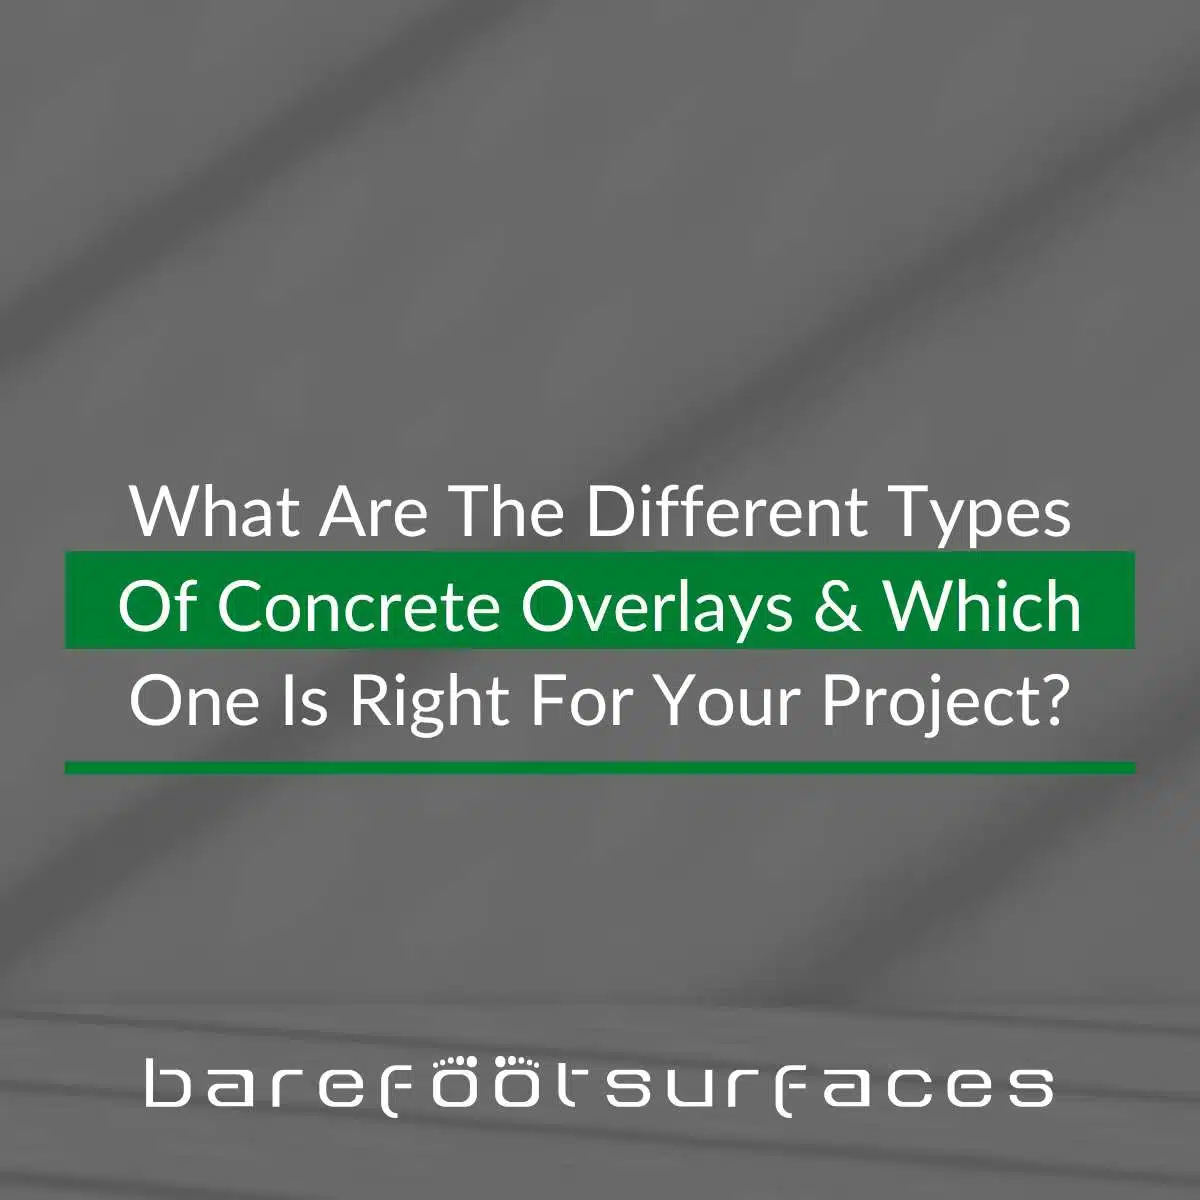 What Are The Different Types Of Concrete Overlays & Which One Is Right For Your Project